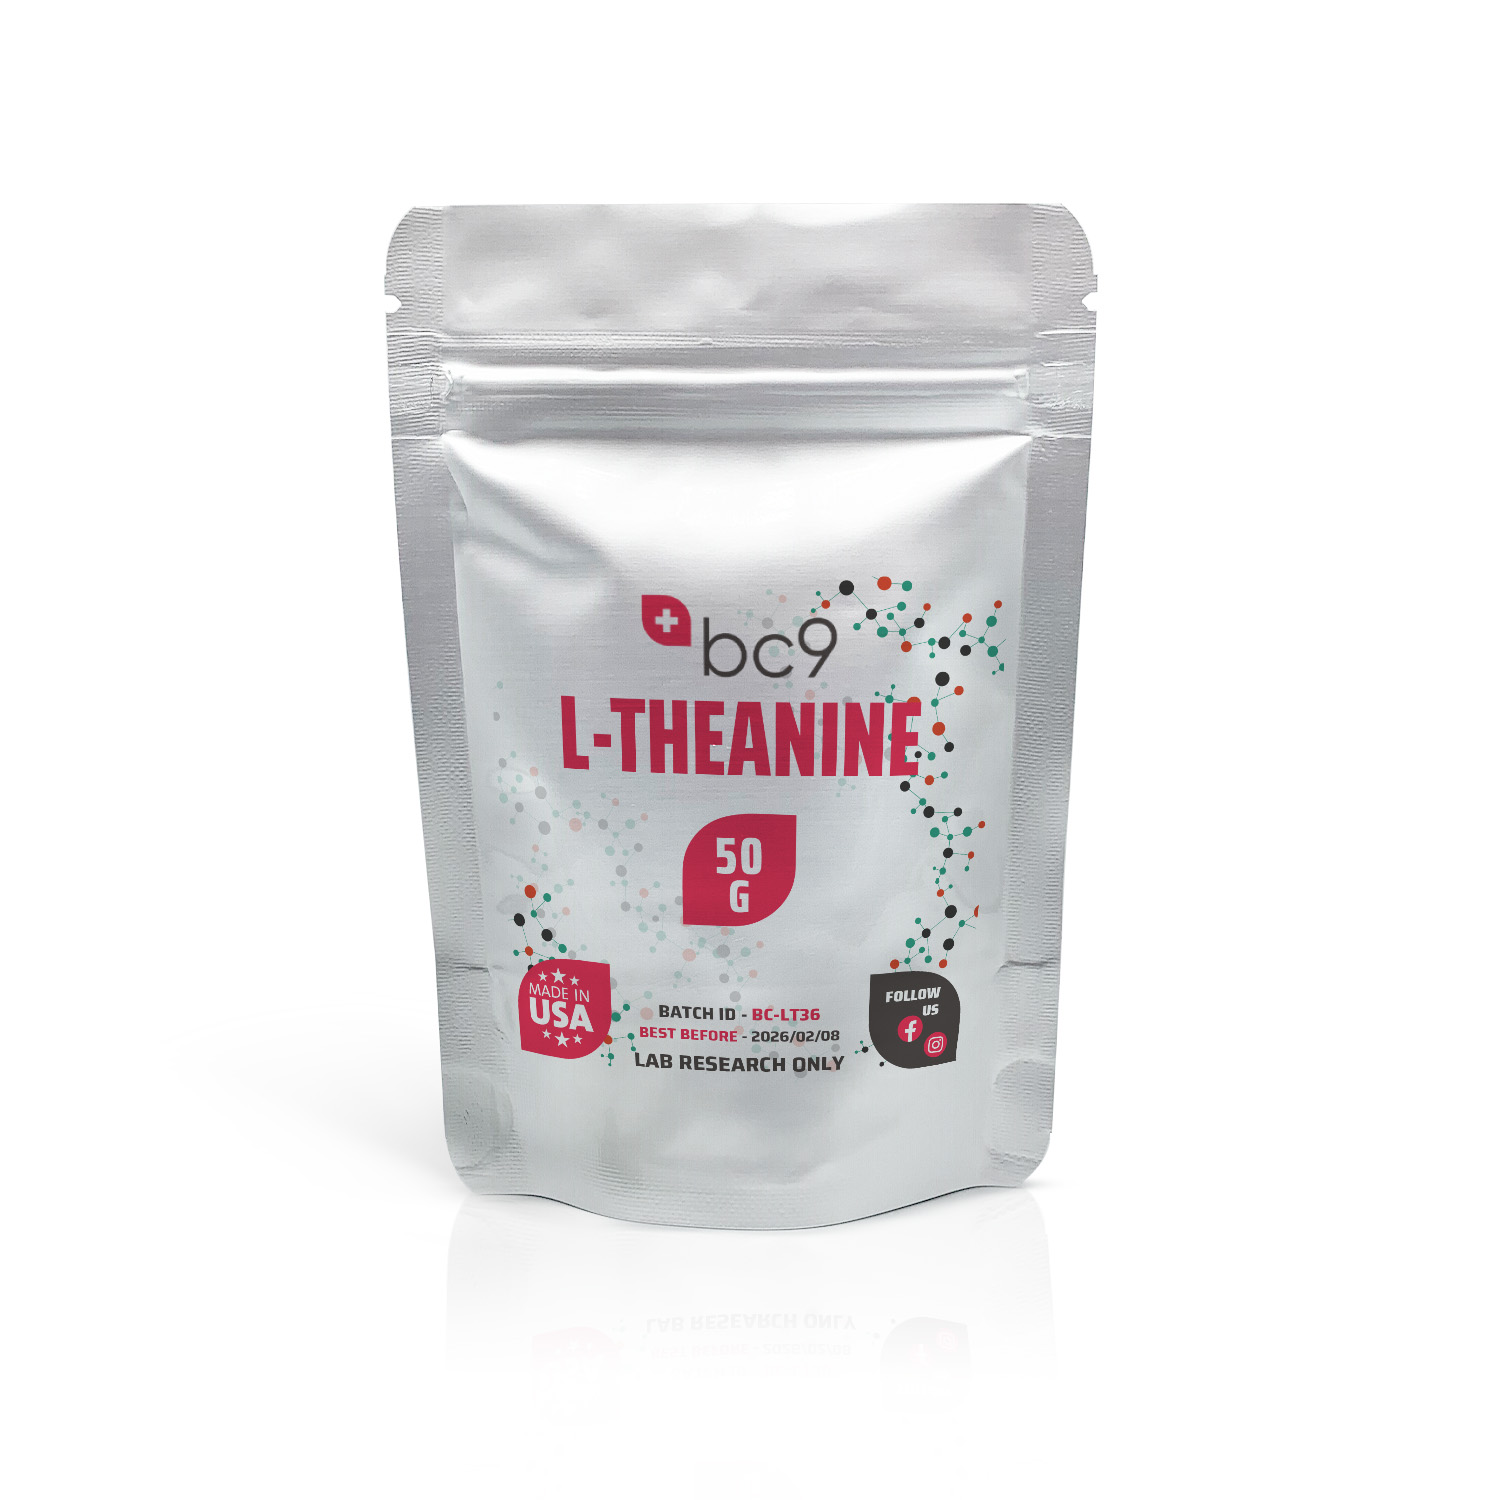 L-Theanine Powder For Sale | Fast Shipping | BC9.org